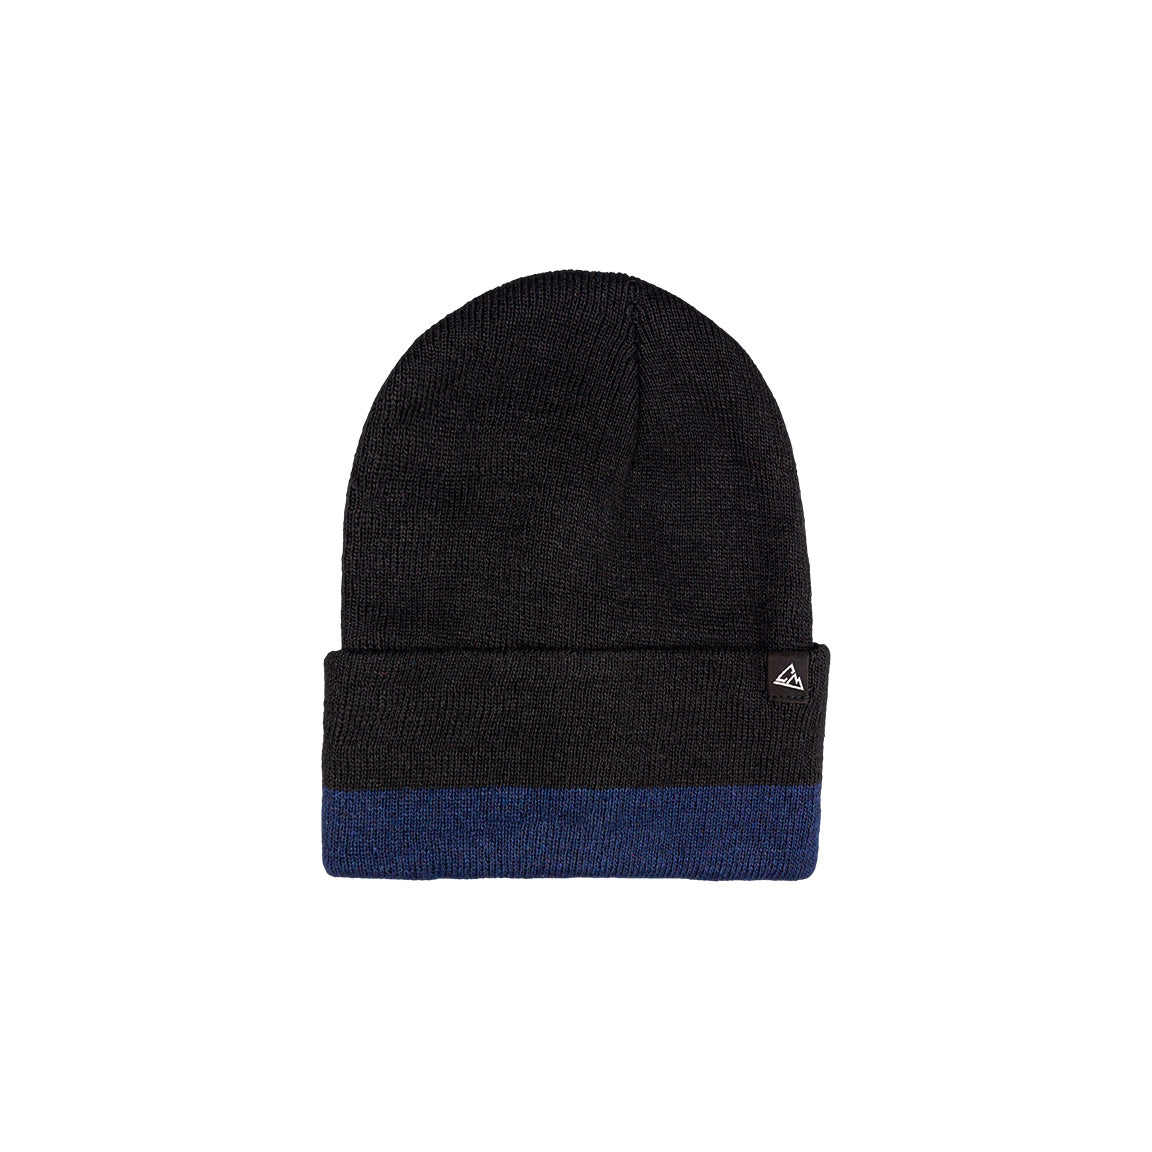 This shows a black ribbed beanie that features a blue block on the cuff, complemented by a small triangular logo.